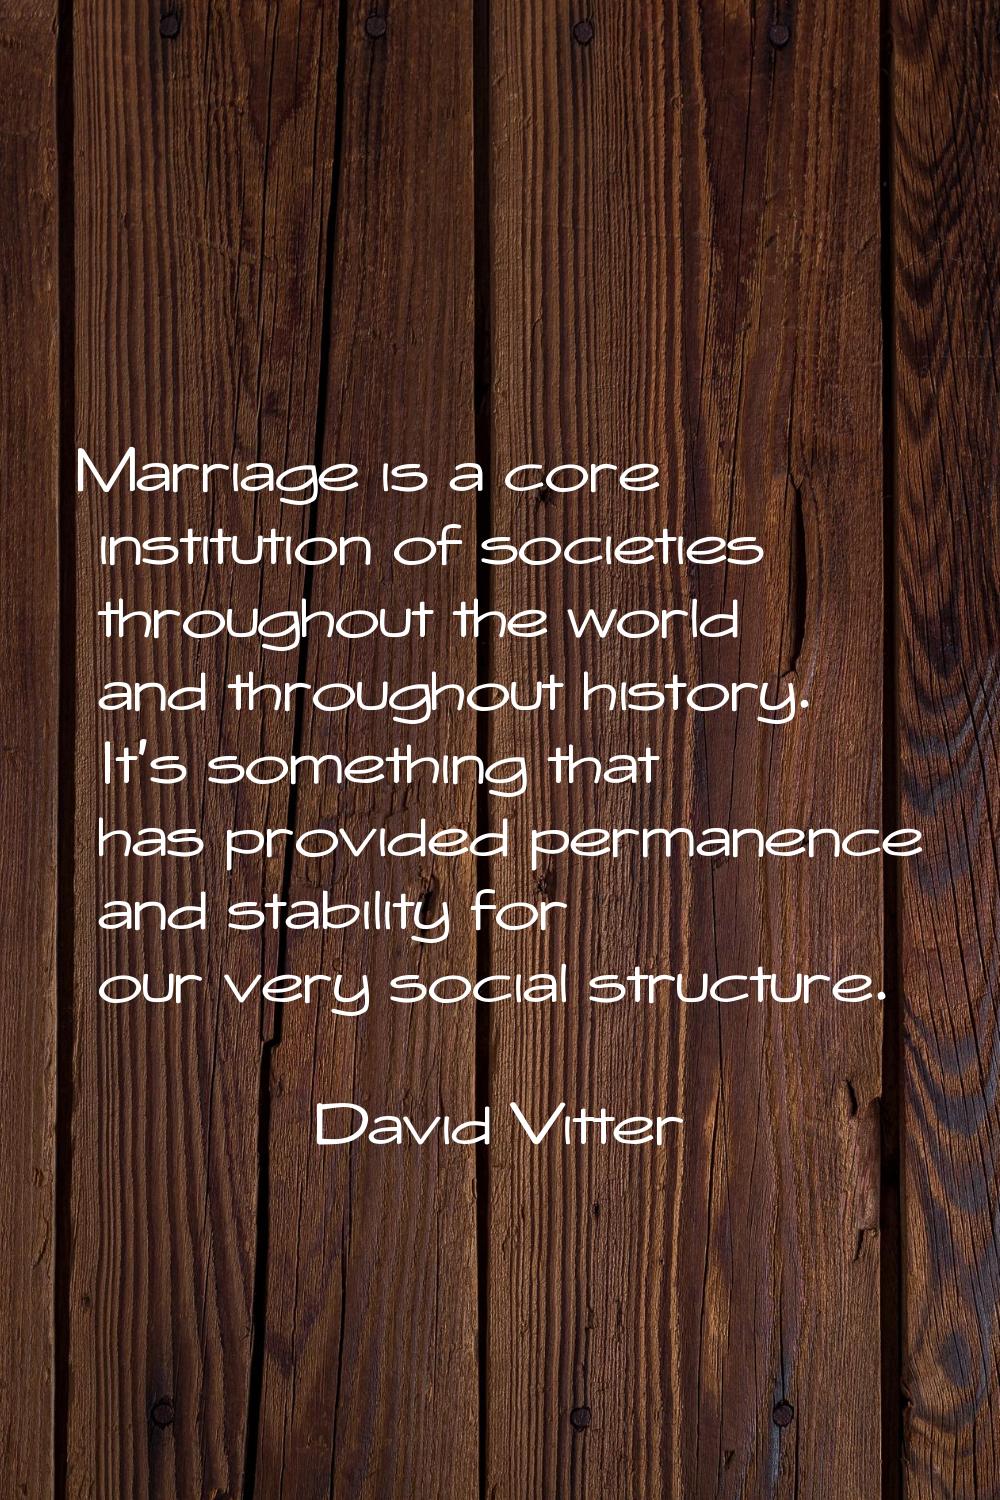 Marriage is a core institution of societies throughout the world and throughout history. It's somet